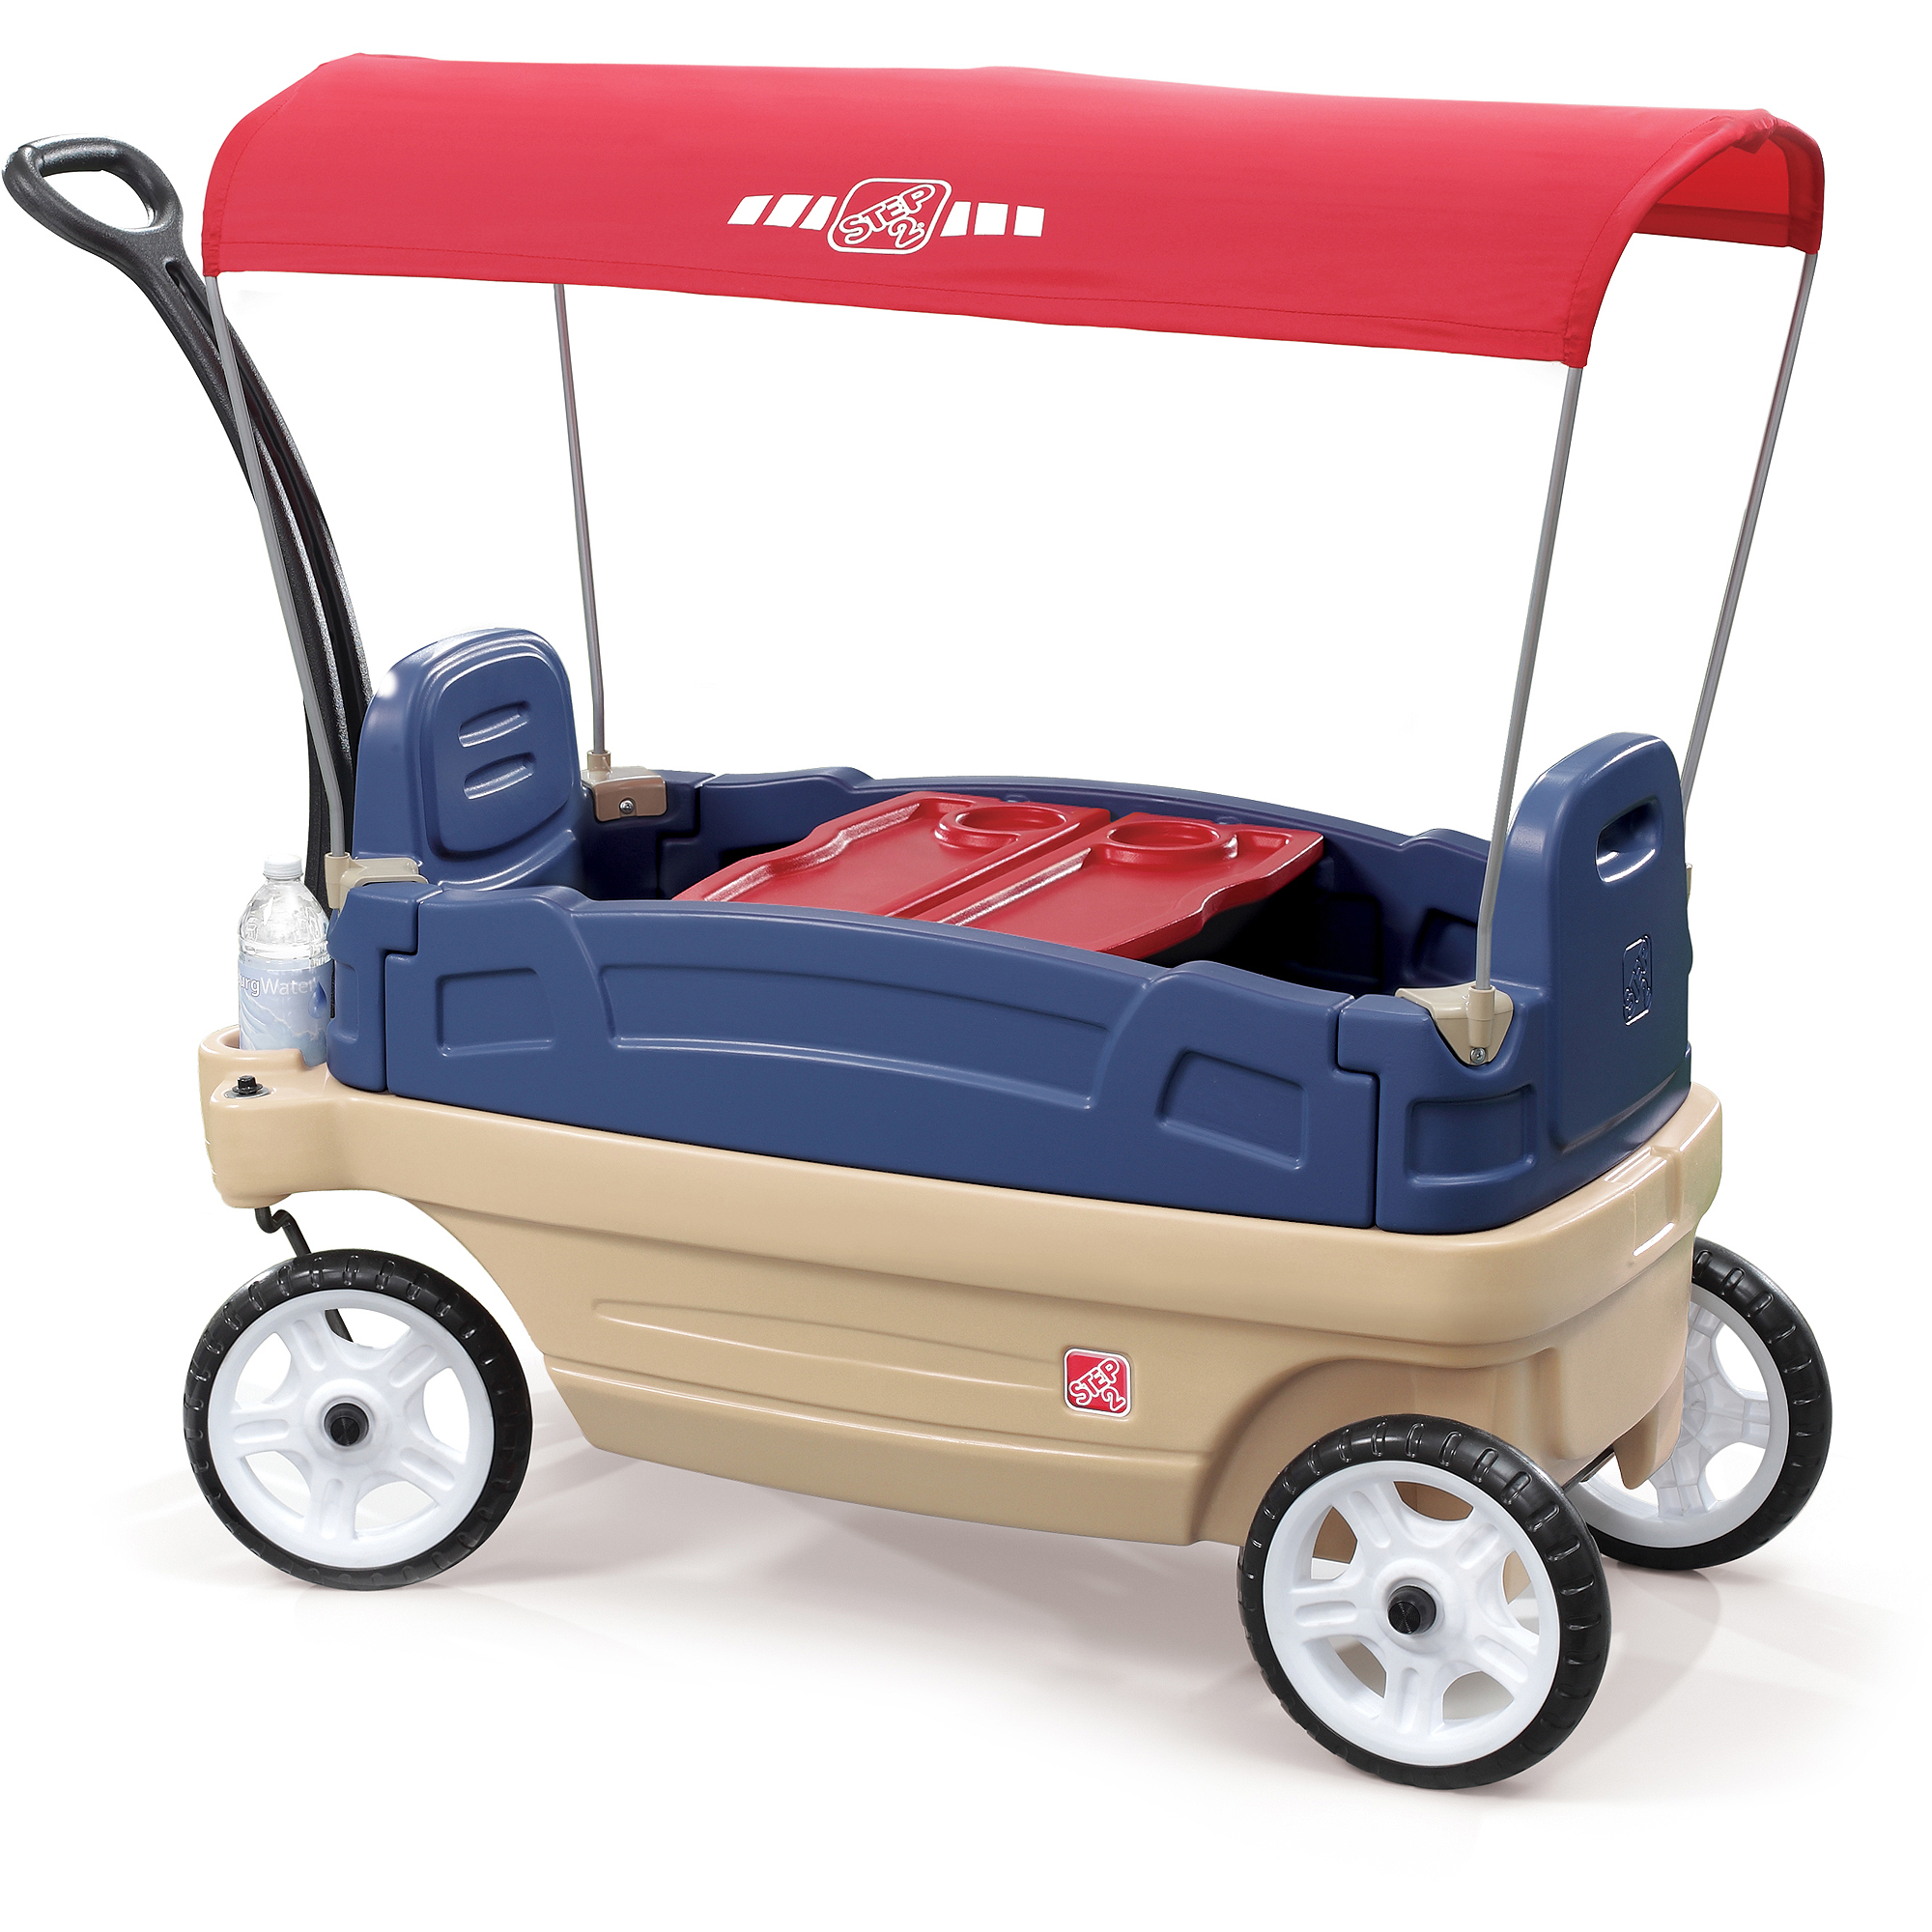 Step2 Whisper Ride Touring Wagon Plastic Canopy Wagon for Kids - image 5 of 6